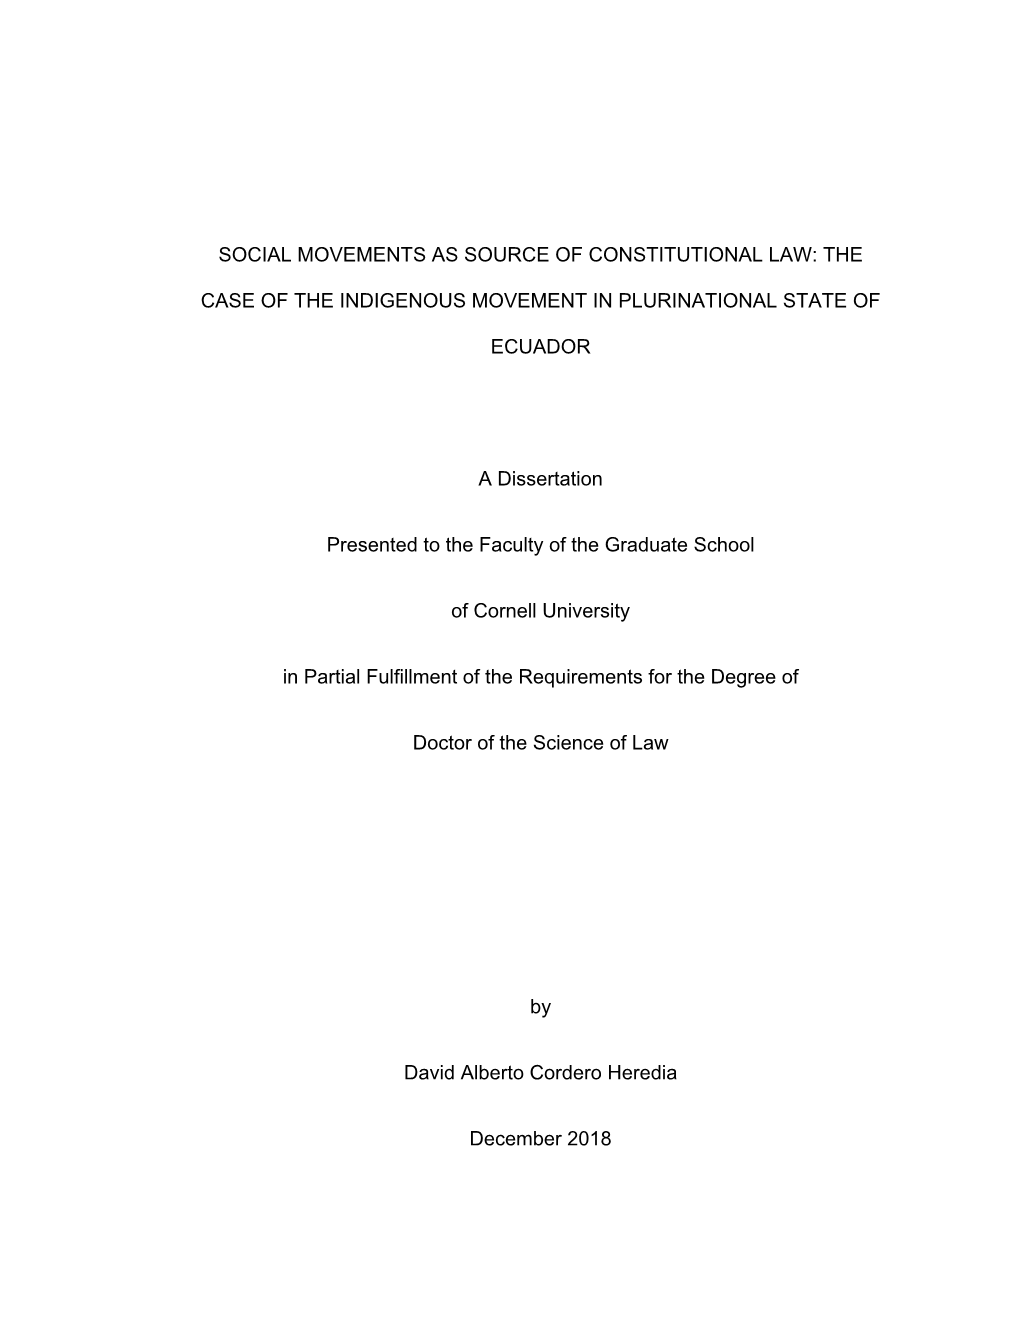 Social Movements As Source of Constitutional Law: The